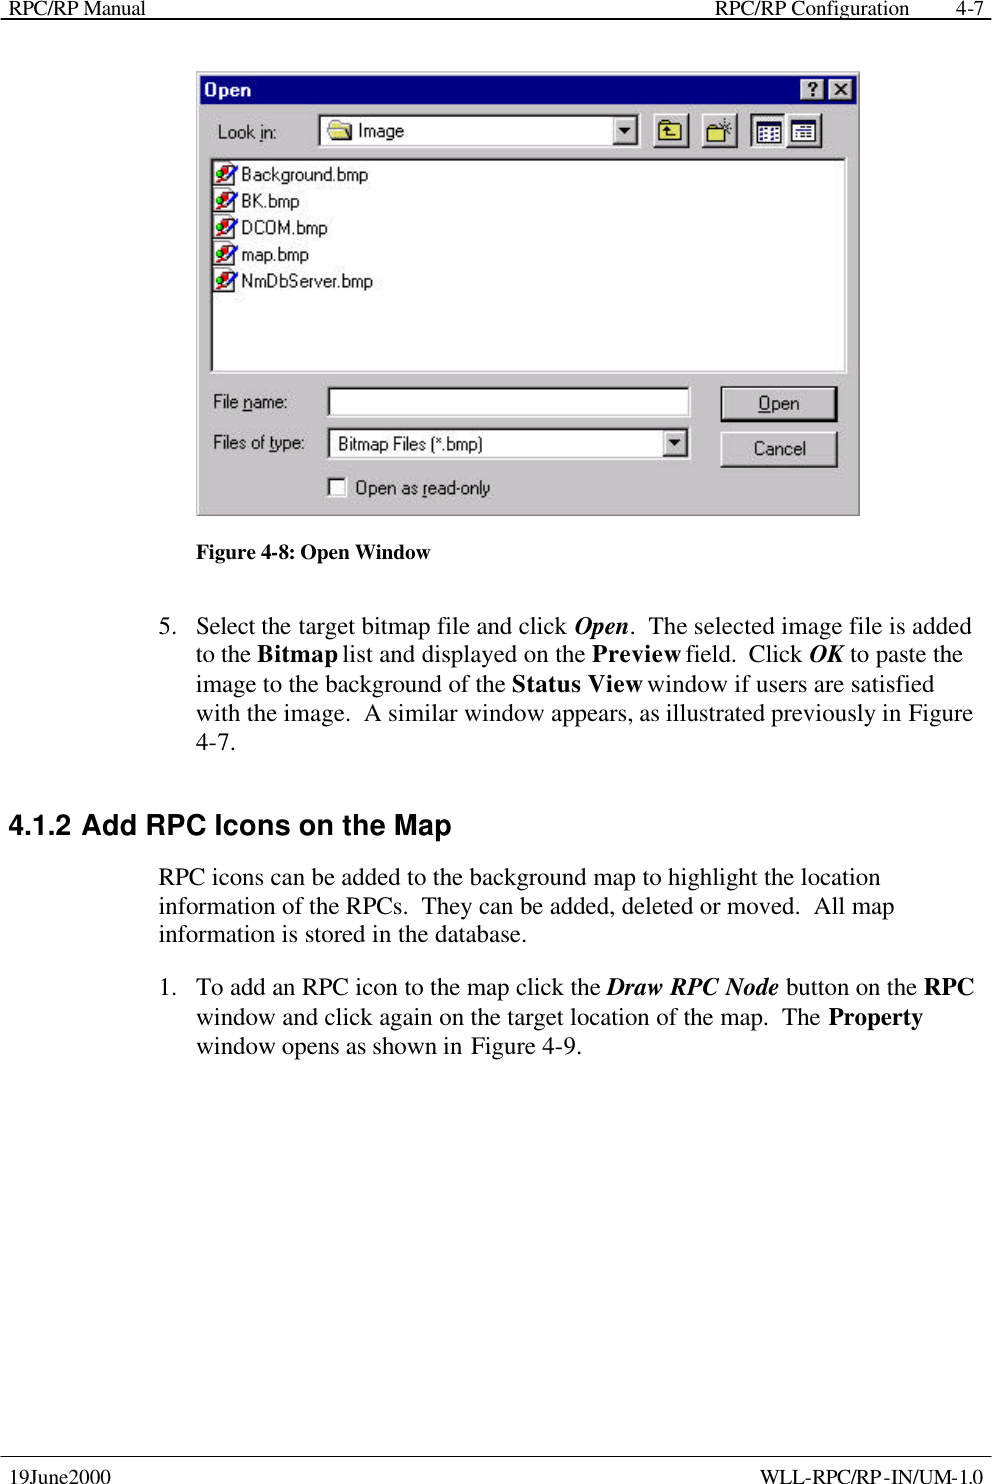 RPC/RP Manual    RPC/RP Configuration 19June2000    WLL-RPC/RP-IN/UM-1.0 4-7 Figure 4-8: Open Window 5.  Select the target bitmap file and click Open.  The selected image file is added to the Bitmap list and displayed on the Preview field.  Click OK to paste the image to the background of the Status View window if users are satisfied with the image.  A similar window appears, as illustrated previously in Figure 4-7. 4.1.2 Add RPC Icons on the Map RPC icons can be added to the background map to highlight the location information of the RPCs.  They can be added, deleted or moved.  All map information is stored in the database. 1.  To add an RPC icon to the map click the Draw RPC Node button on the RPC window and click again on the target location of the map.  The Property window opens as shown in Figure 4-9.   